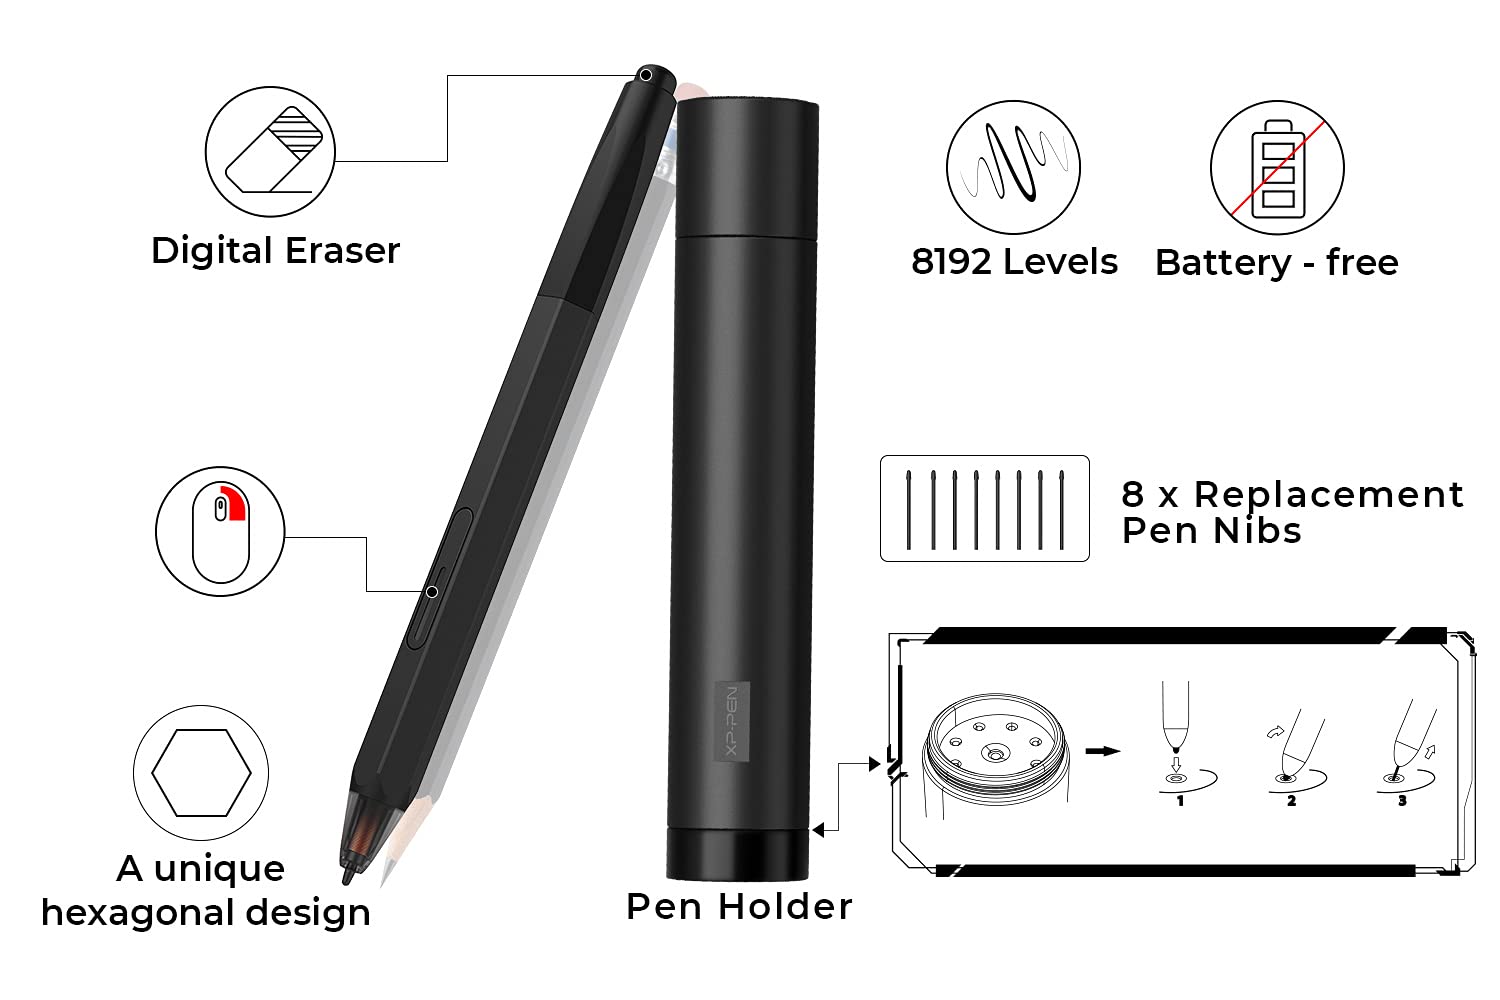 XP-PEN Artist12 11.6 Inch FHD Drawing Monitor Pen Display Graphic Monitor with PN06 Battery-Free Multi-Function Pen Holder and Glove 8192 Pressure Sensitivity